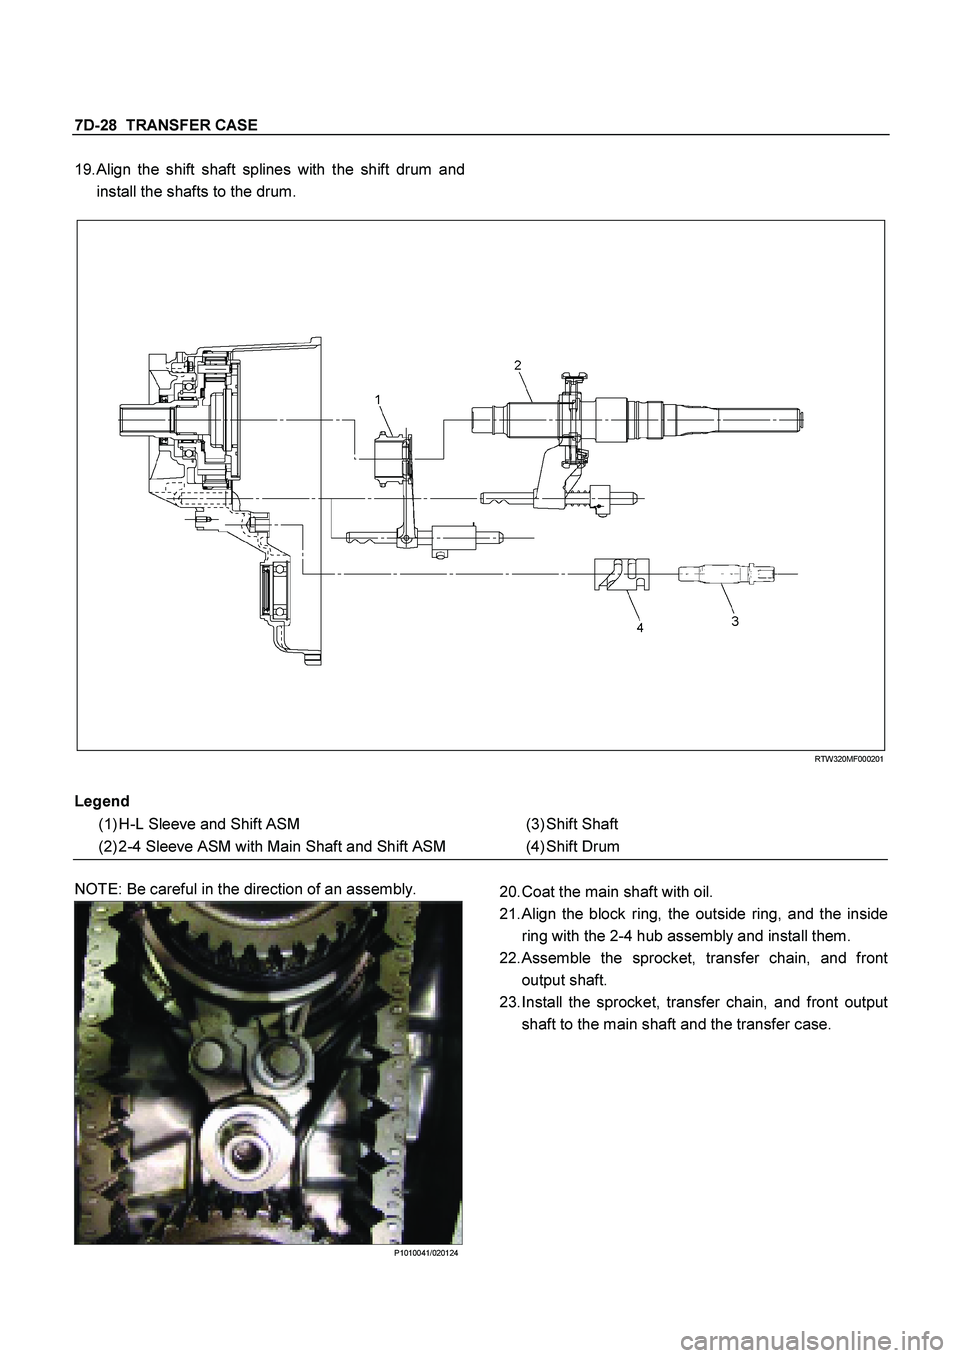 ISUZU TF SERIES 2004  Workshop Manual 7D-28  TRANSFER CASE
 
19. Align the shift shaft splines with the shift drum and
install the shafts to the drum.  
 
 
 RTW320MF000201 
 
Legend
 
  
(1) H-L Sleeve and Shift ASM 
 (3) Shift Shaft 
(2